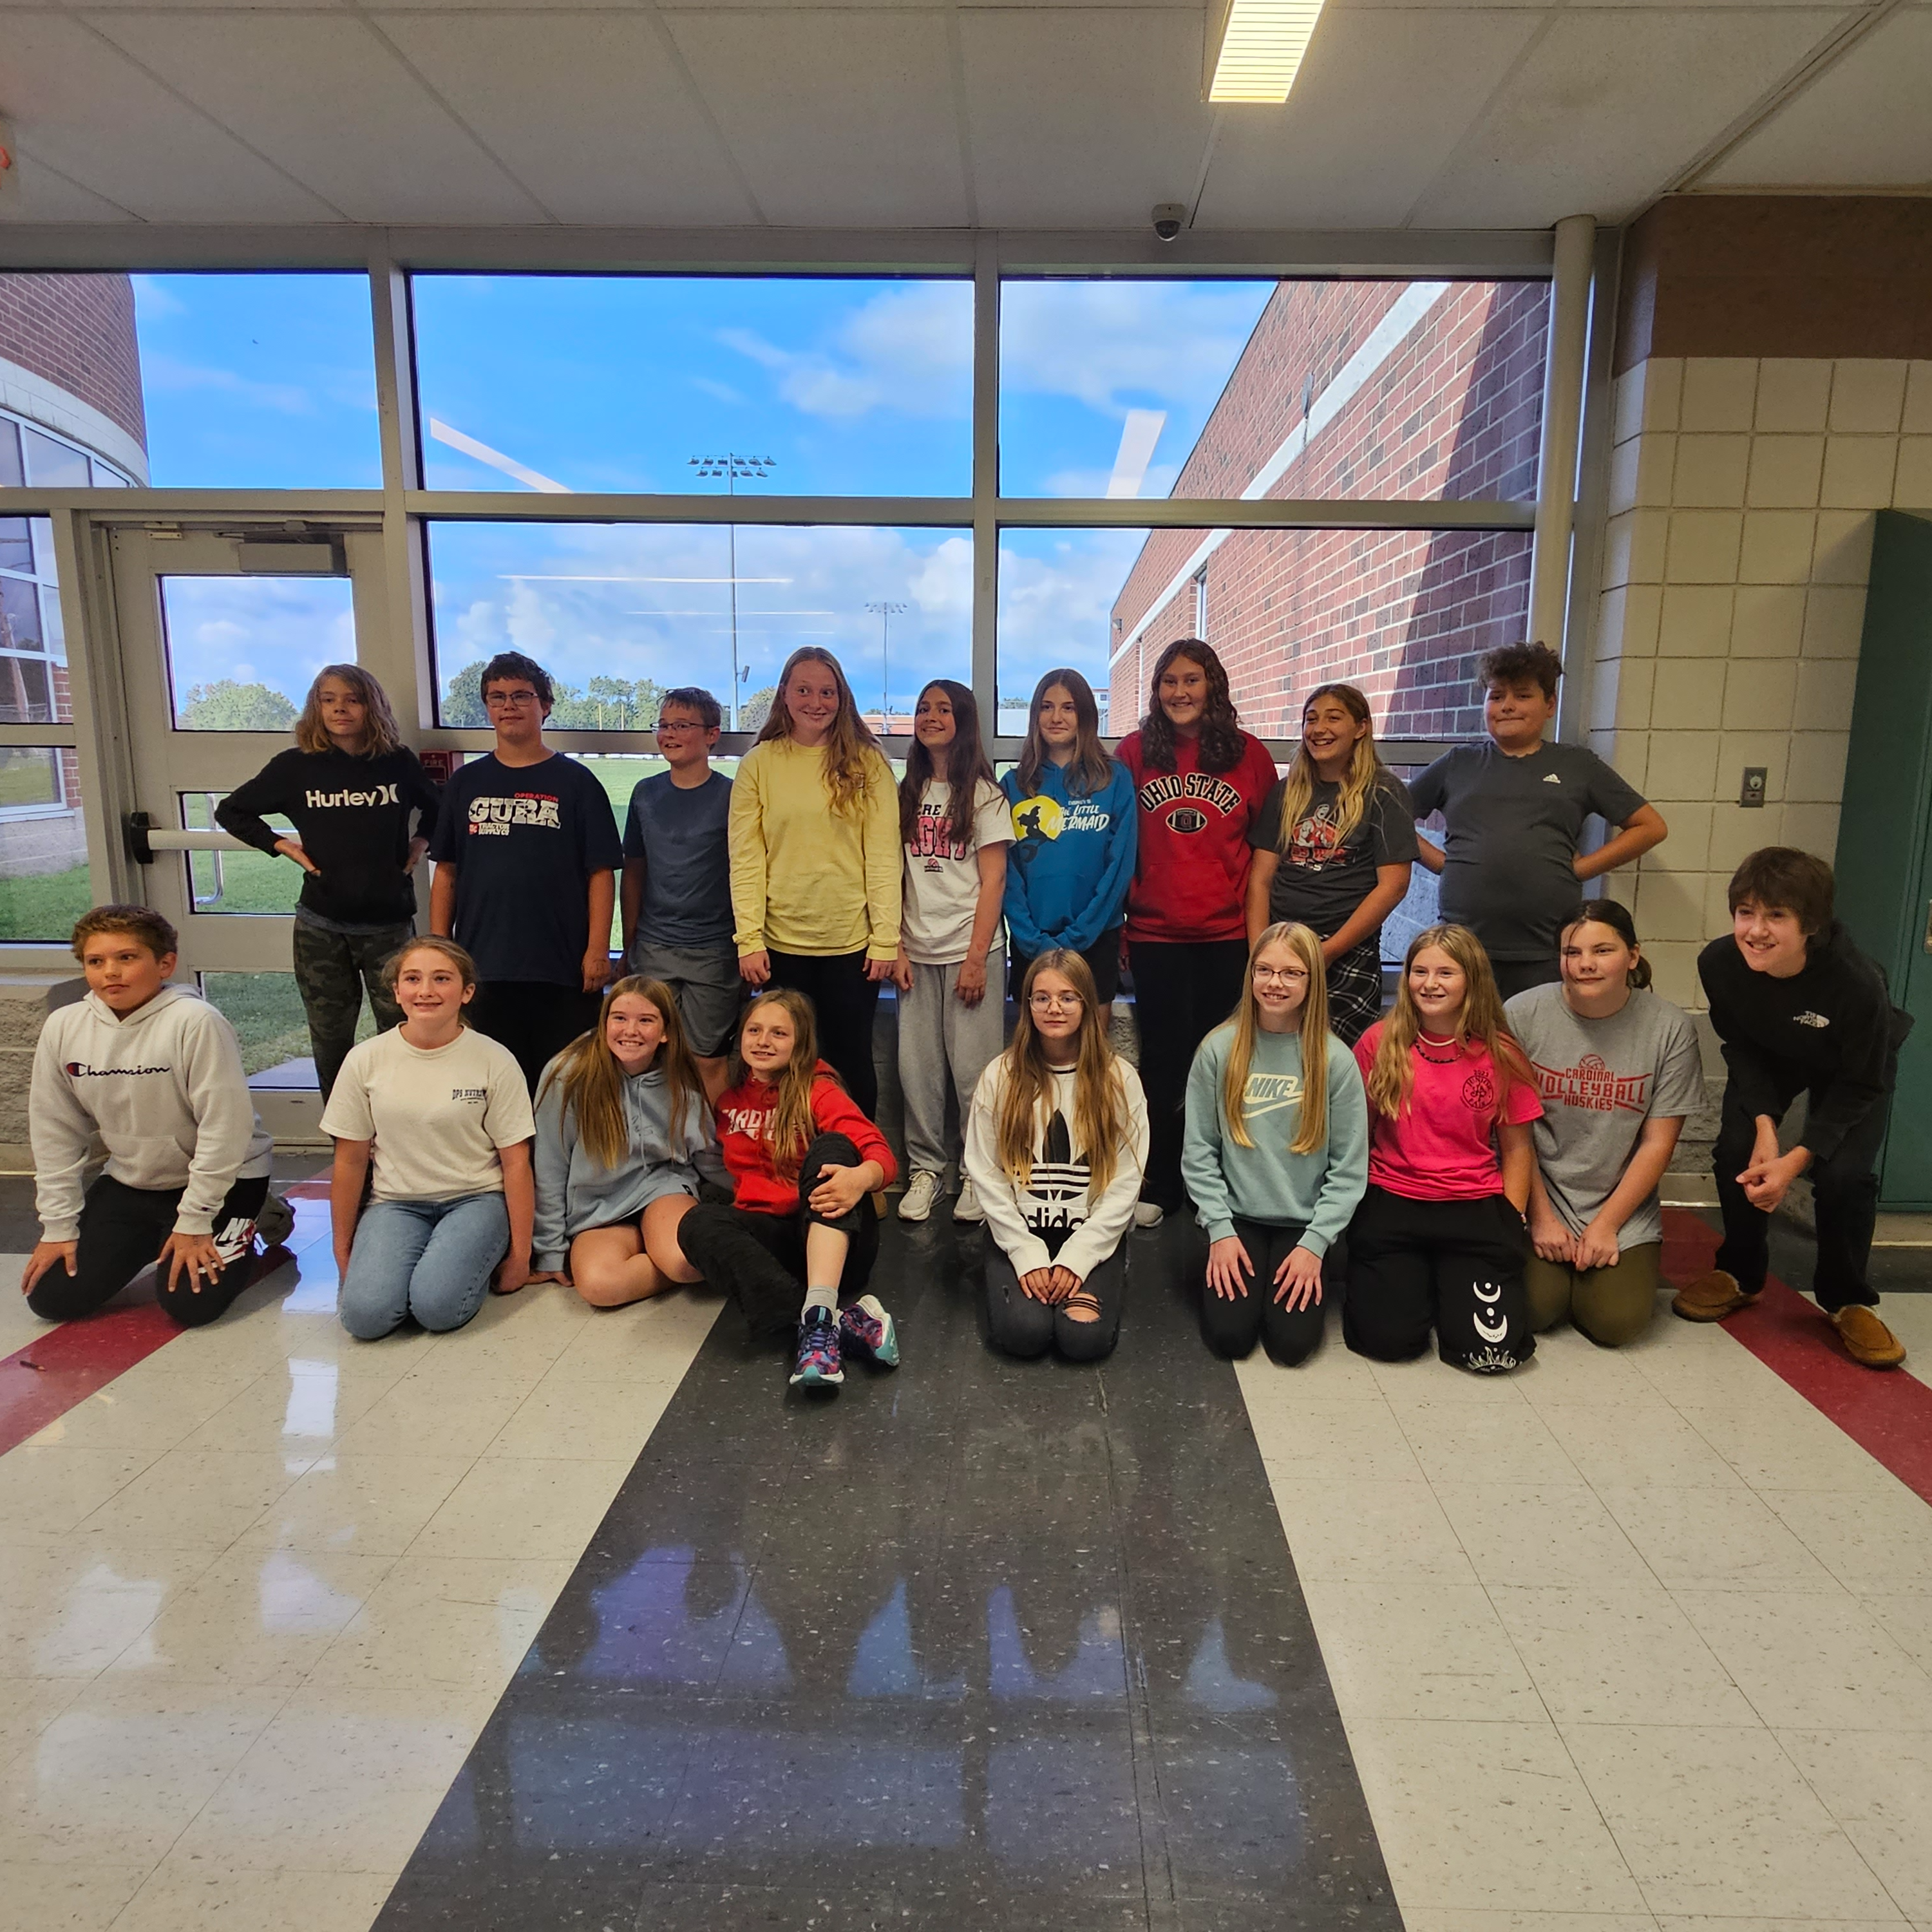 Students in Mr. Bronson's science class pose for a picture after demonstrating what "force" and "gravity is. "